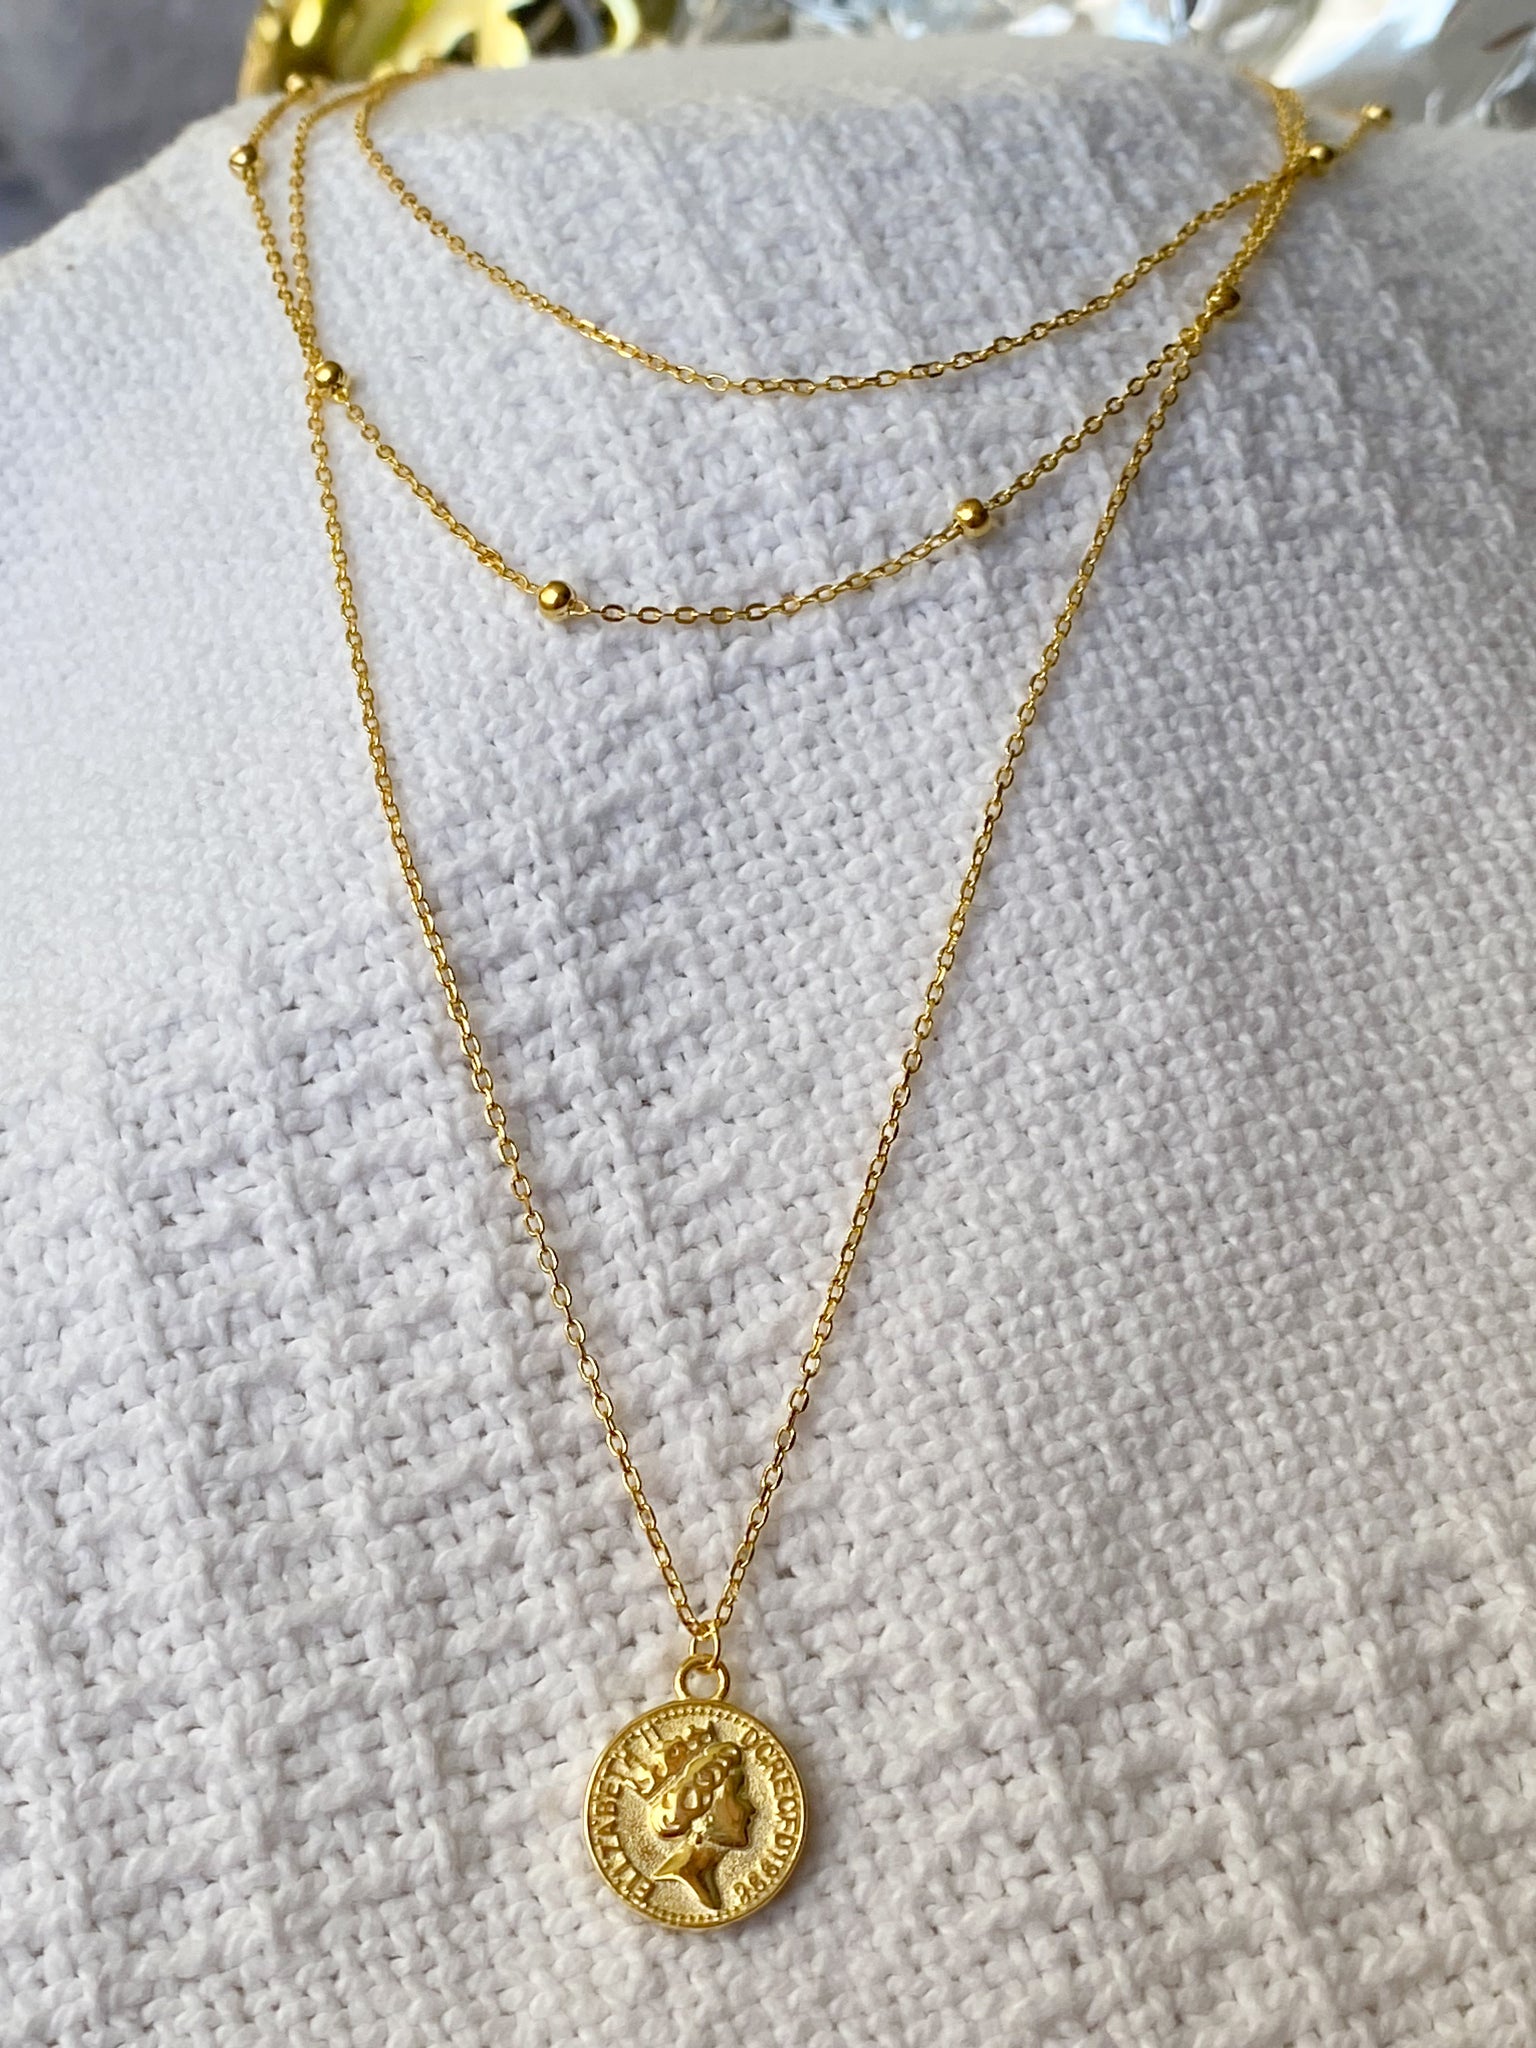 THREE TIER COIN LAYERED NECKLACE